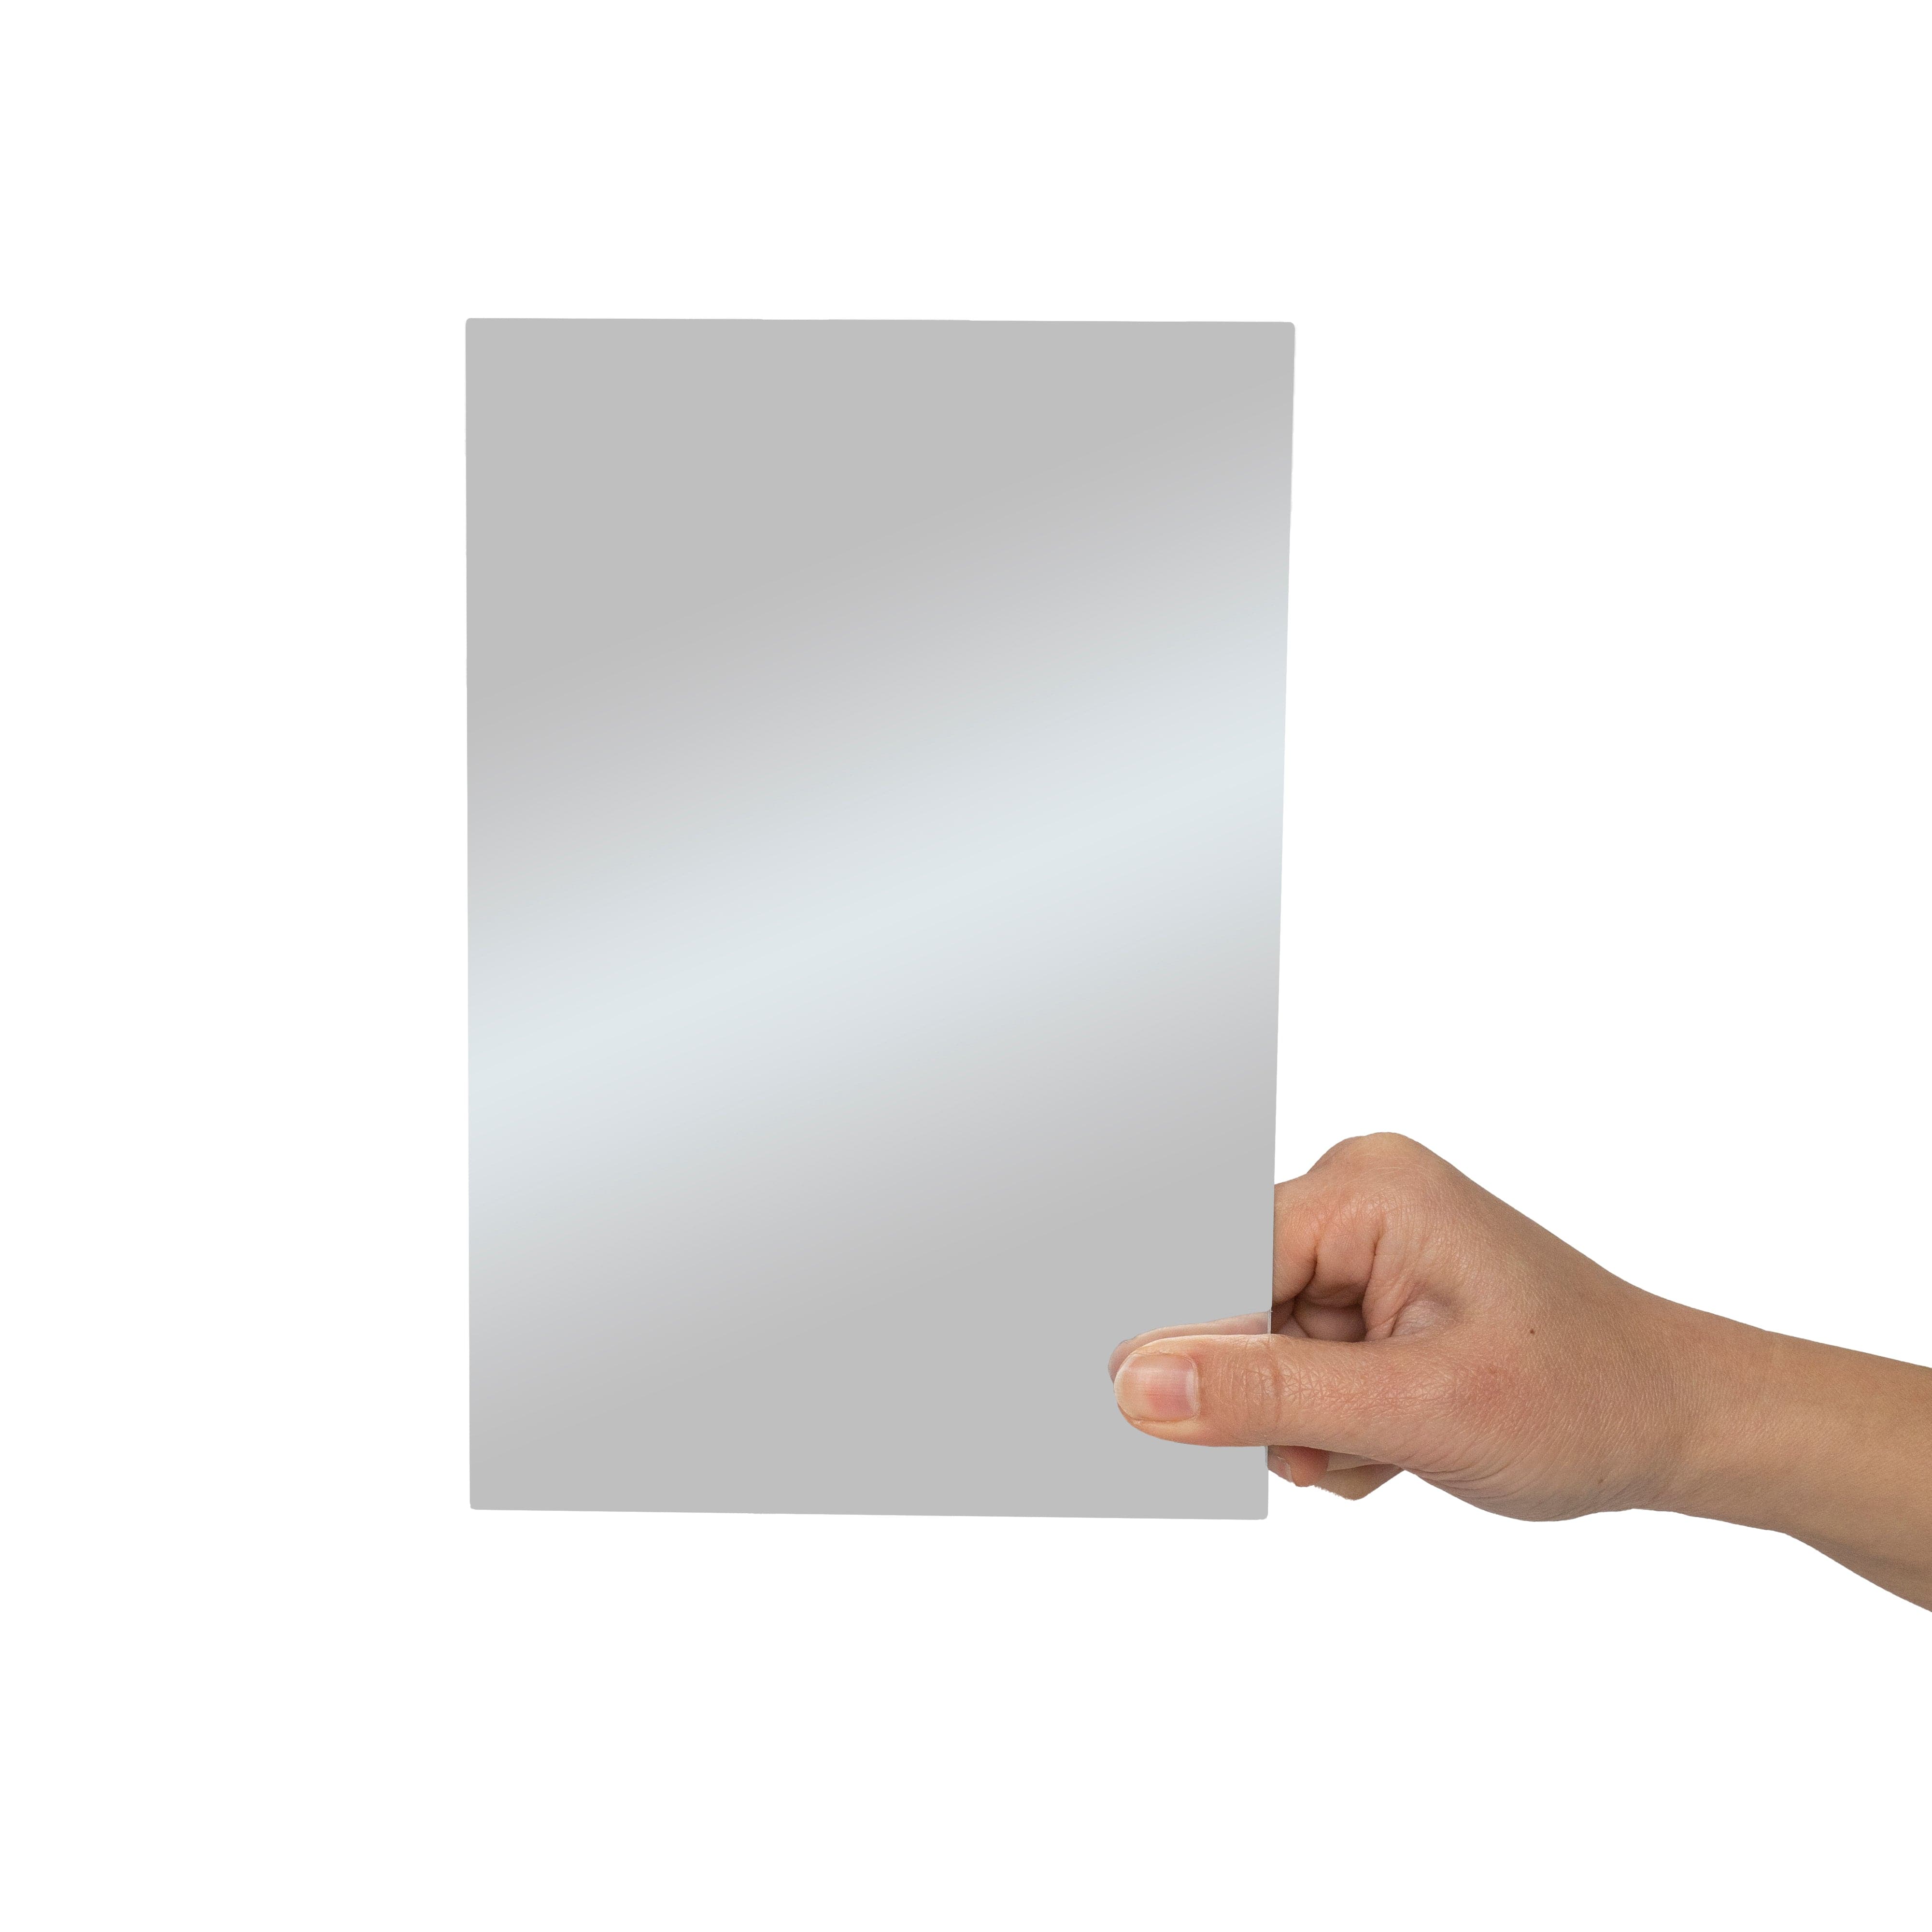 Geometric Acrylic Mirror Styling Props For Photography - Metallic Silver 5 Pack (DEMO STOCK)